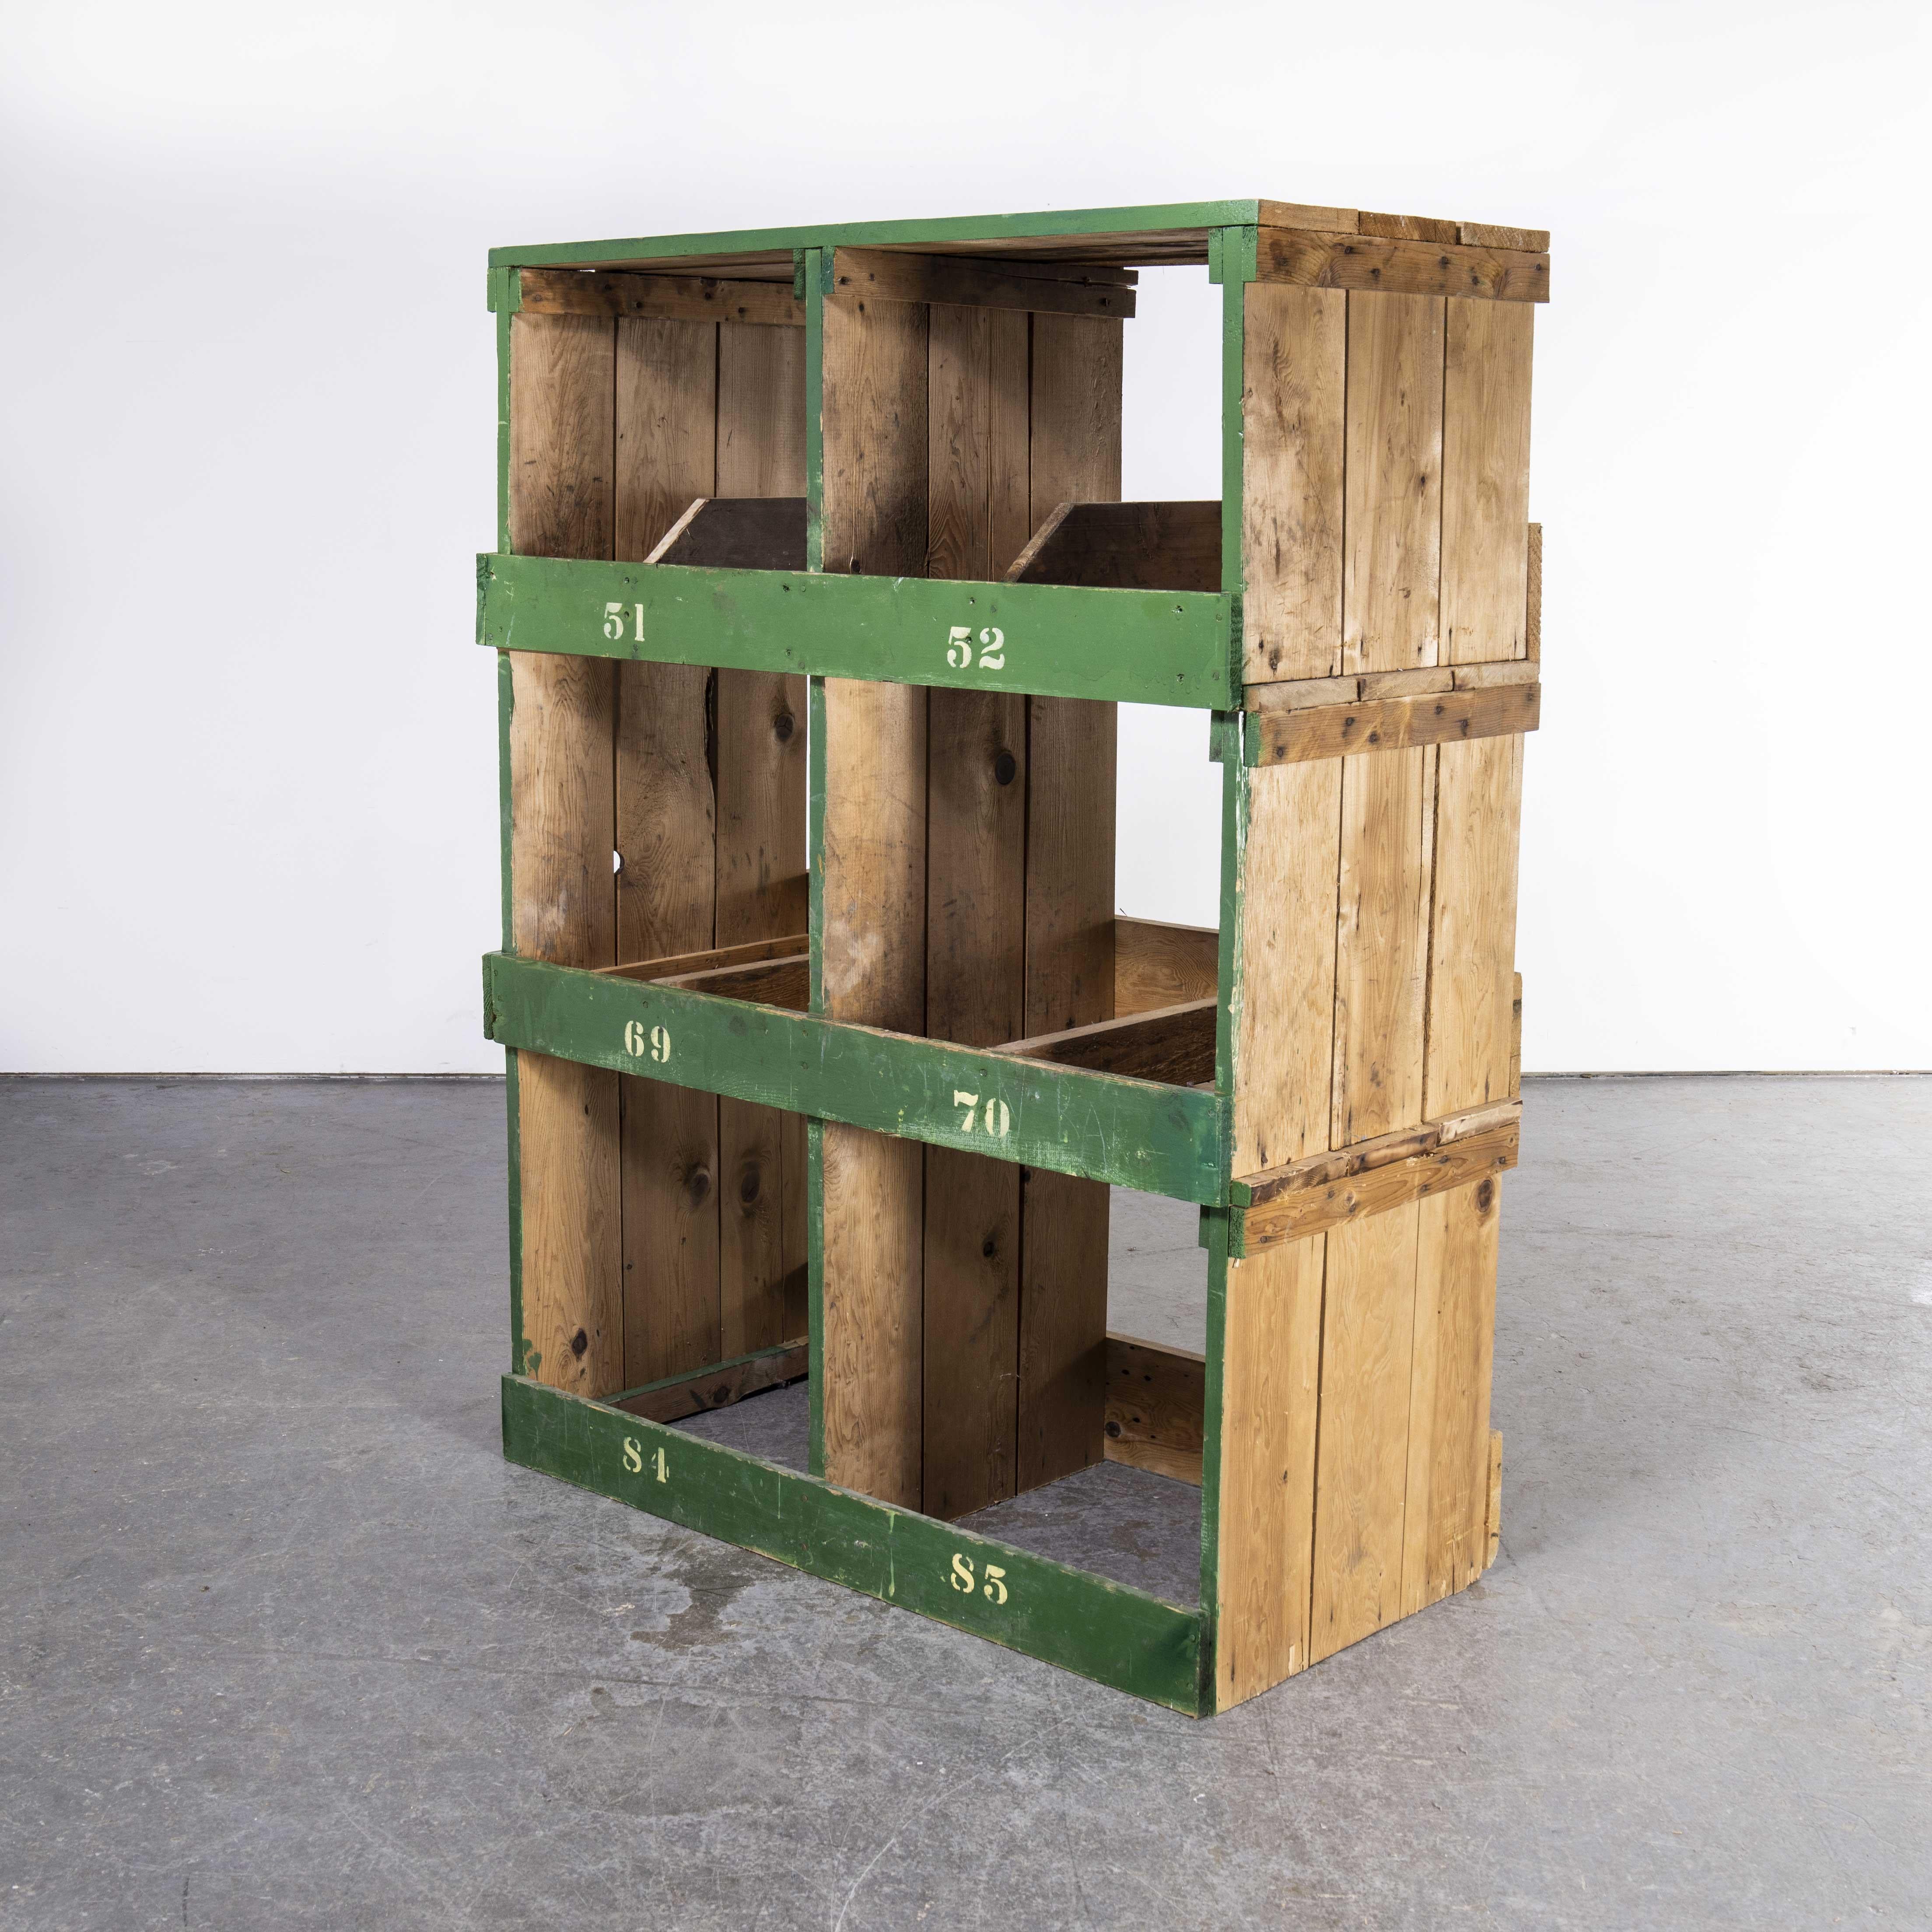 1920’s Late Victorian pigeon hole unit – storage – shelving unit (Model 23)

1920’s Late Victorian pigeon hole unit – storage – shelving unit (Model 23). Sourced from a brickyard in the north of England, outside Hull. The works had been producing